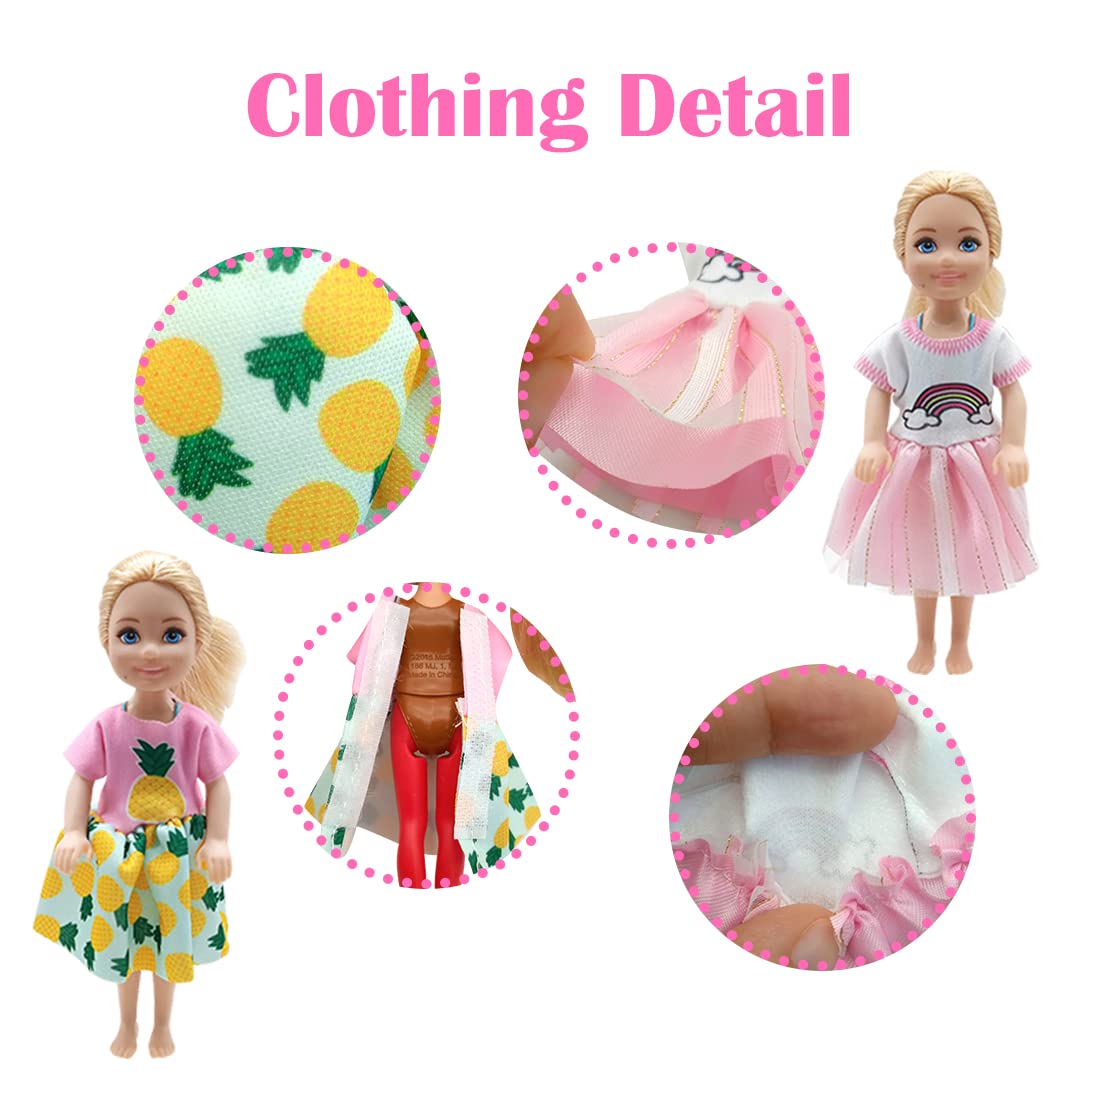 20 Pcs Doll Clothes and Accessories, 10X Clothes, 10X Mini Hangers, for Chelsea Dolls, for Girls Granddaughter Ages 6-12 Gifts